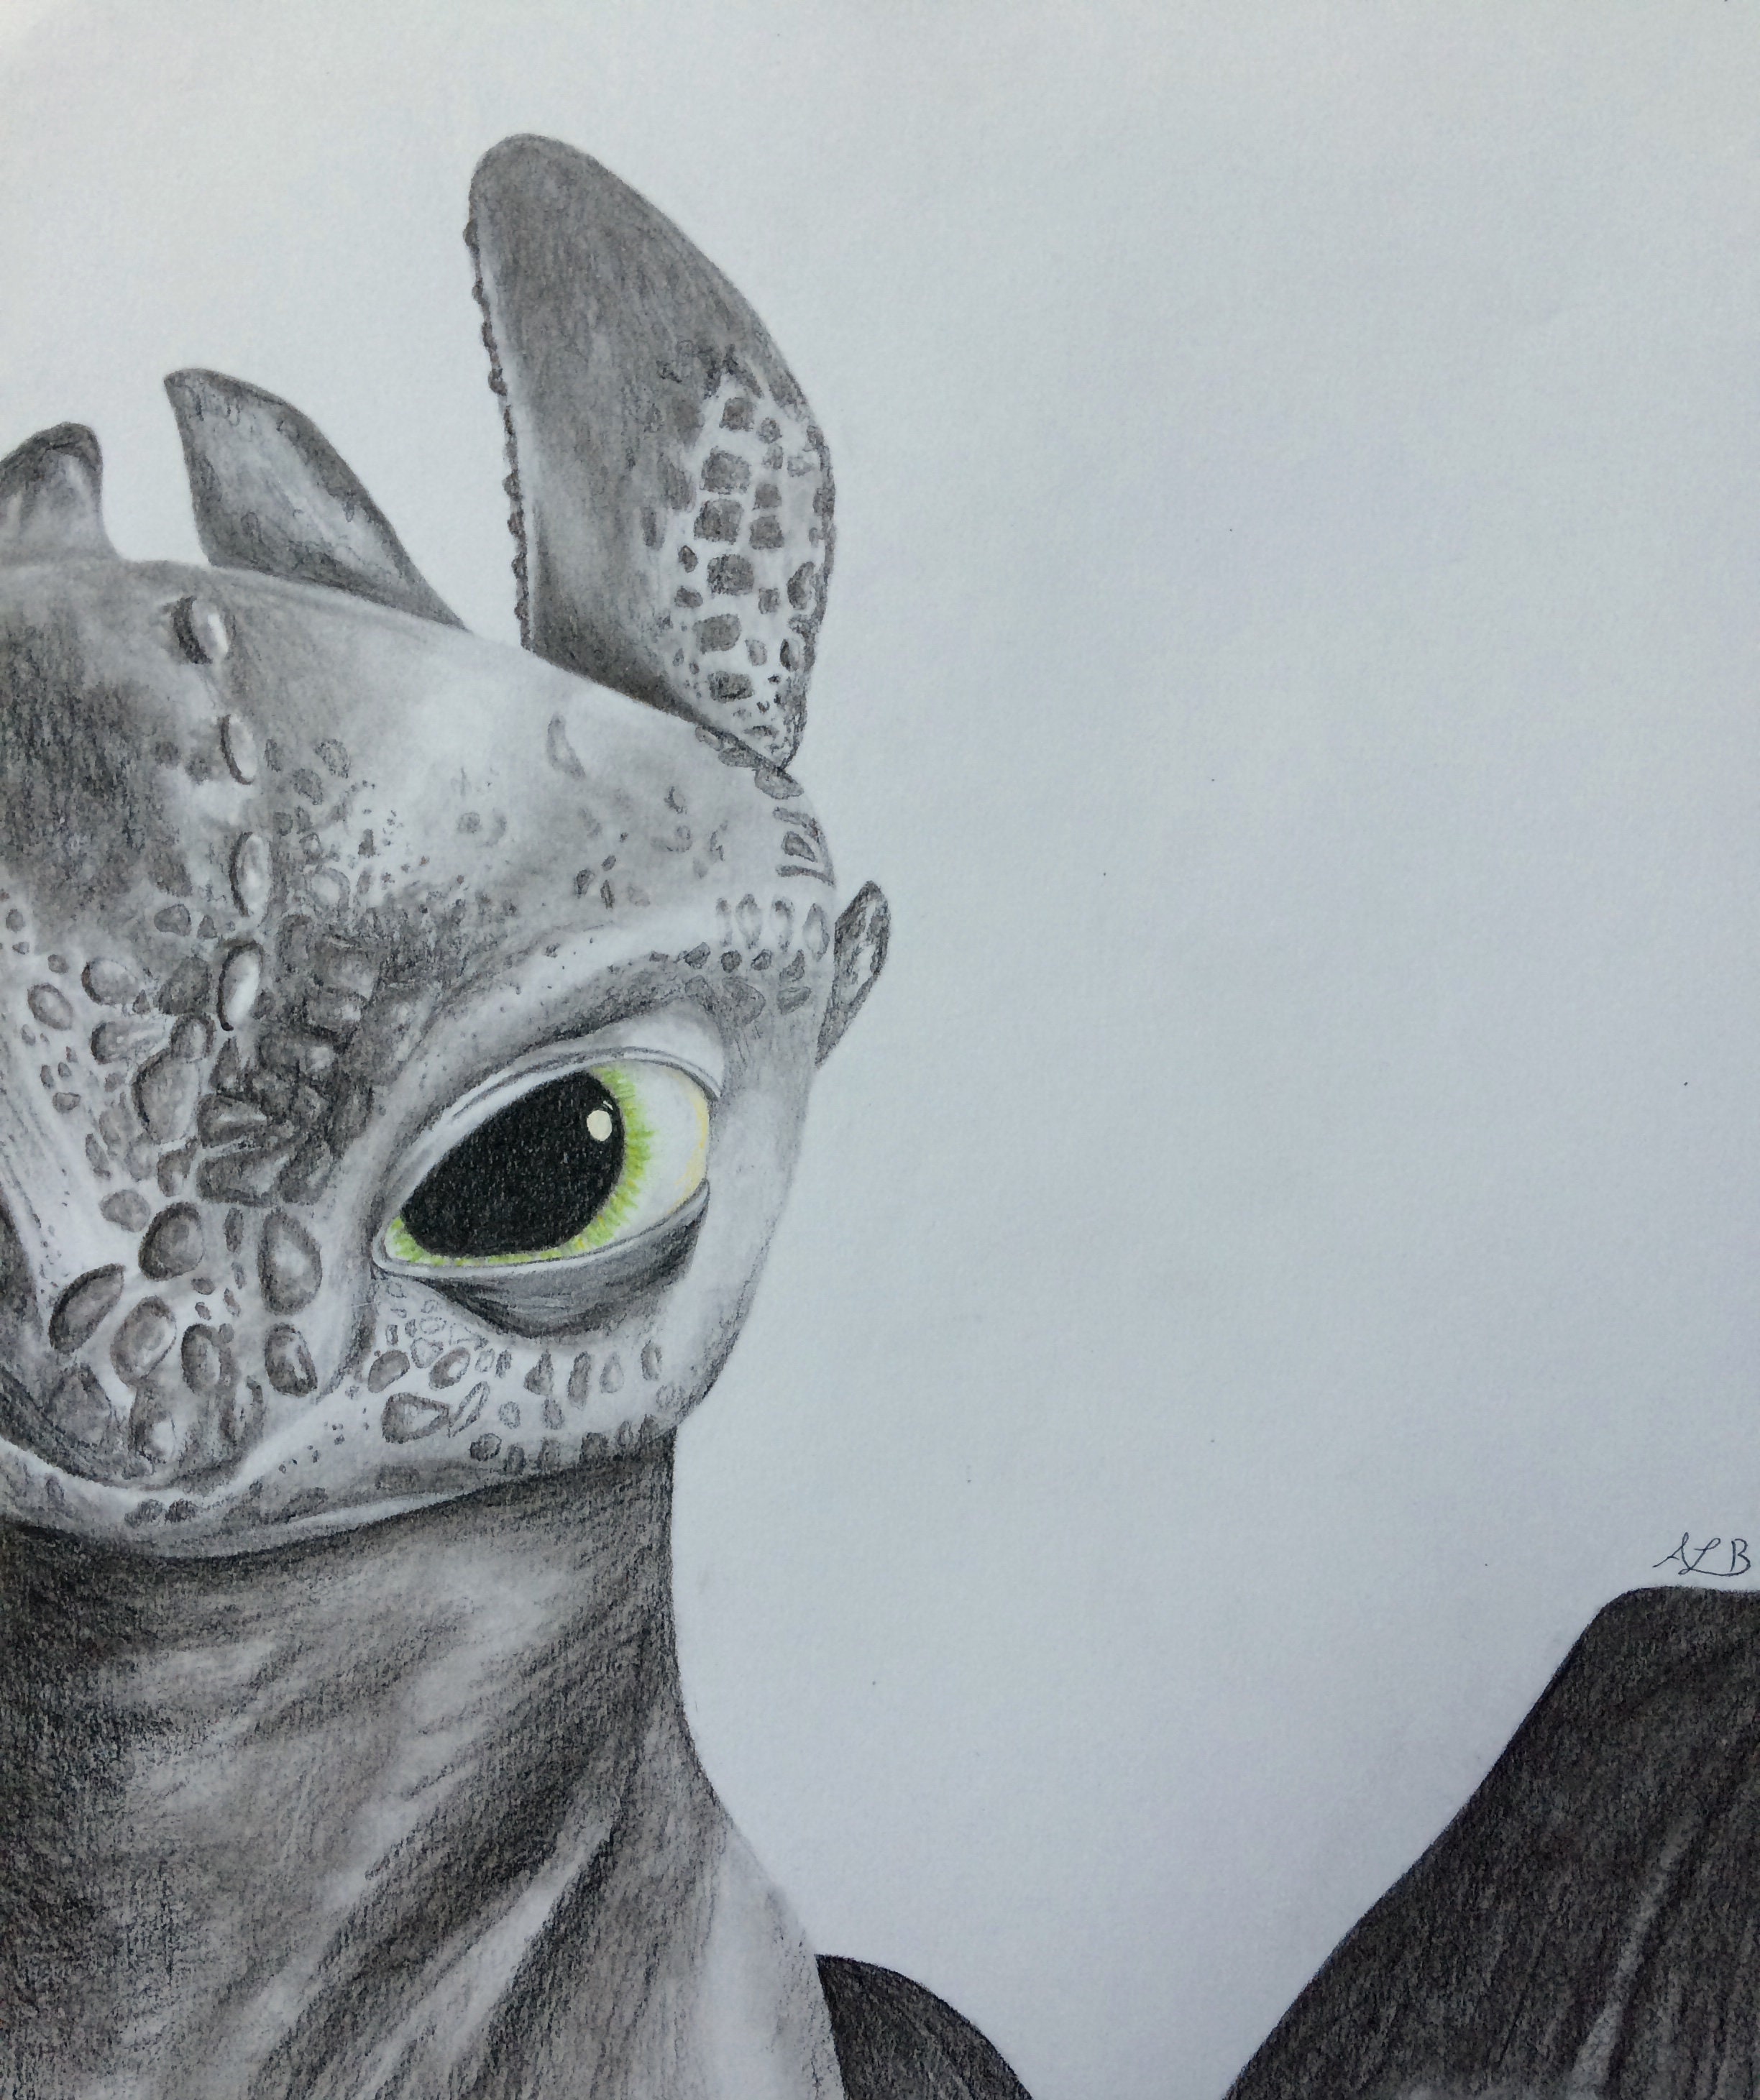 How To Train Your Dragon  Toothless Drawing by MESOLEGEND on DeviantArt